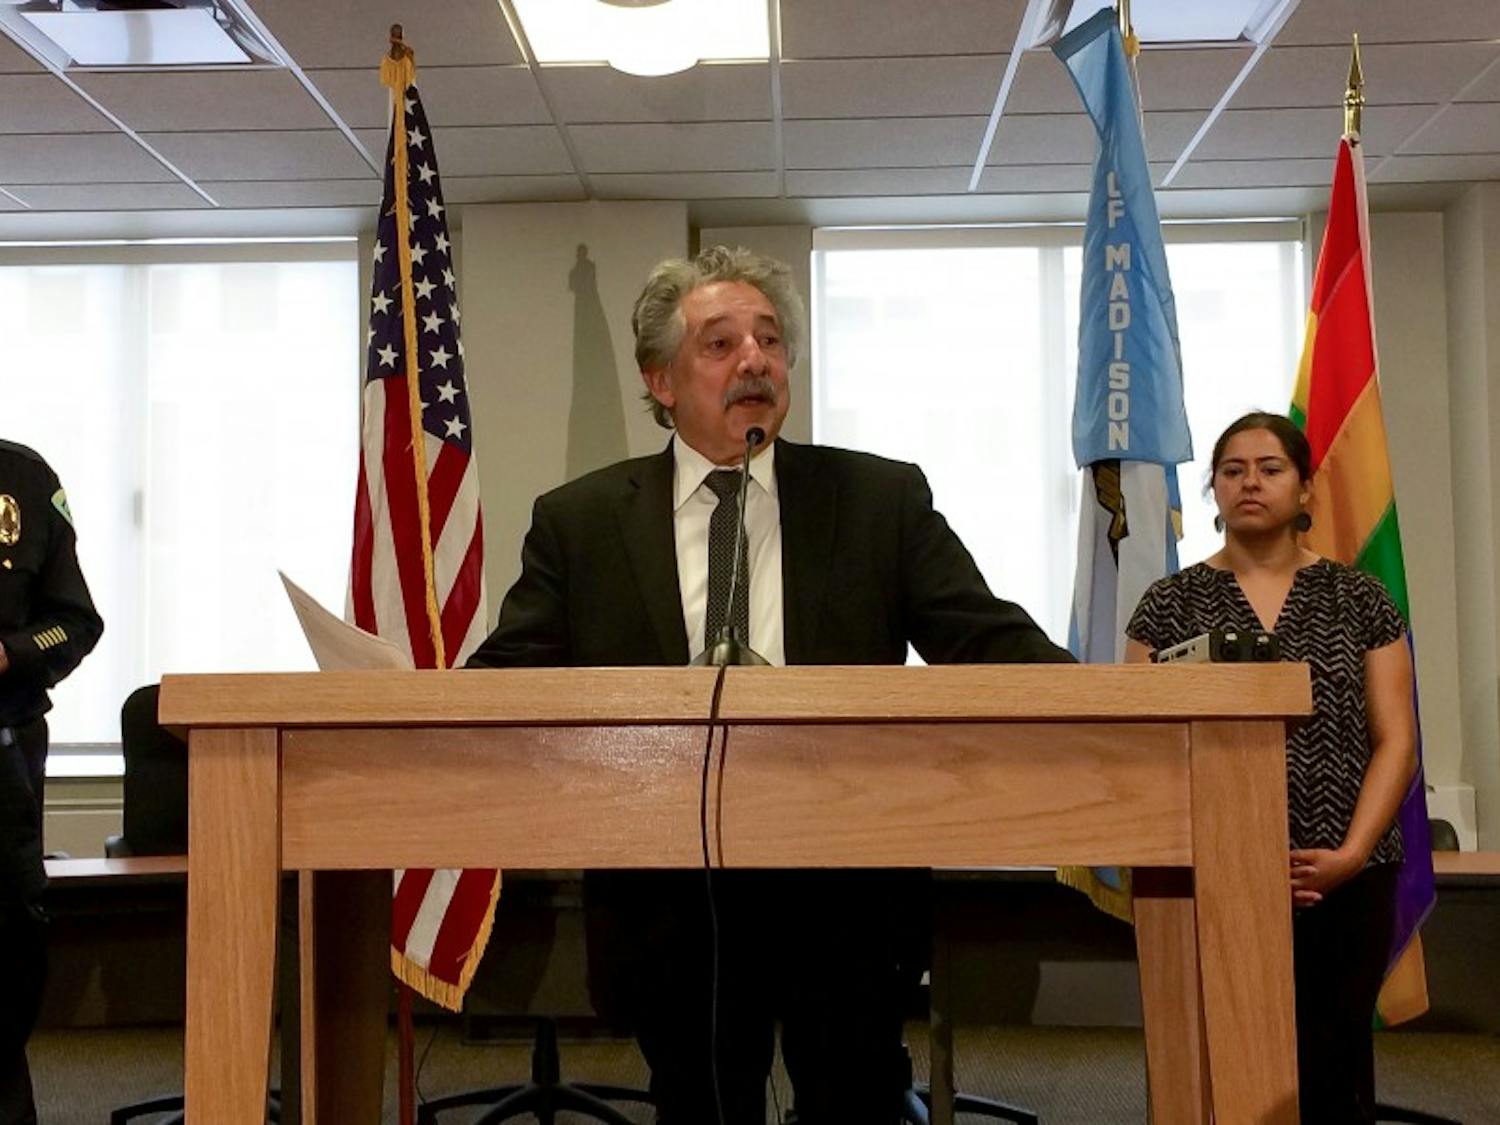 Madison police and officials won’t change immigration policies under a newly signed executive order threatening federal funding cuts to sanctuary cities, Mayor Paul Soglin said Thursday.